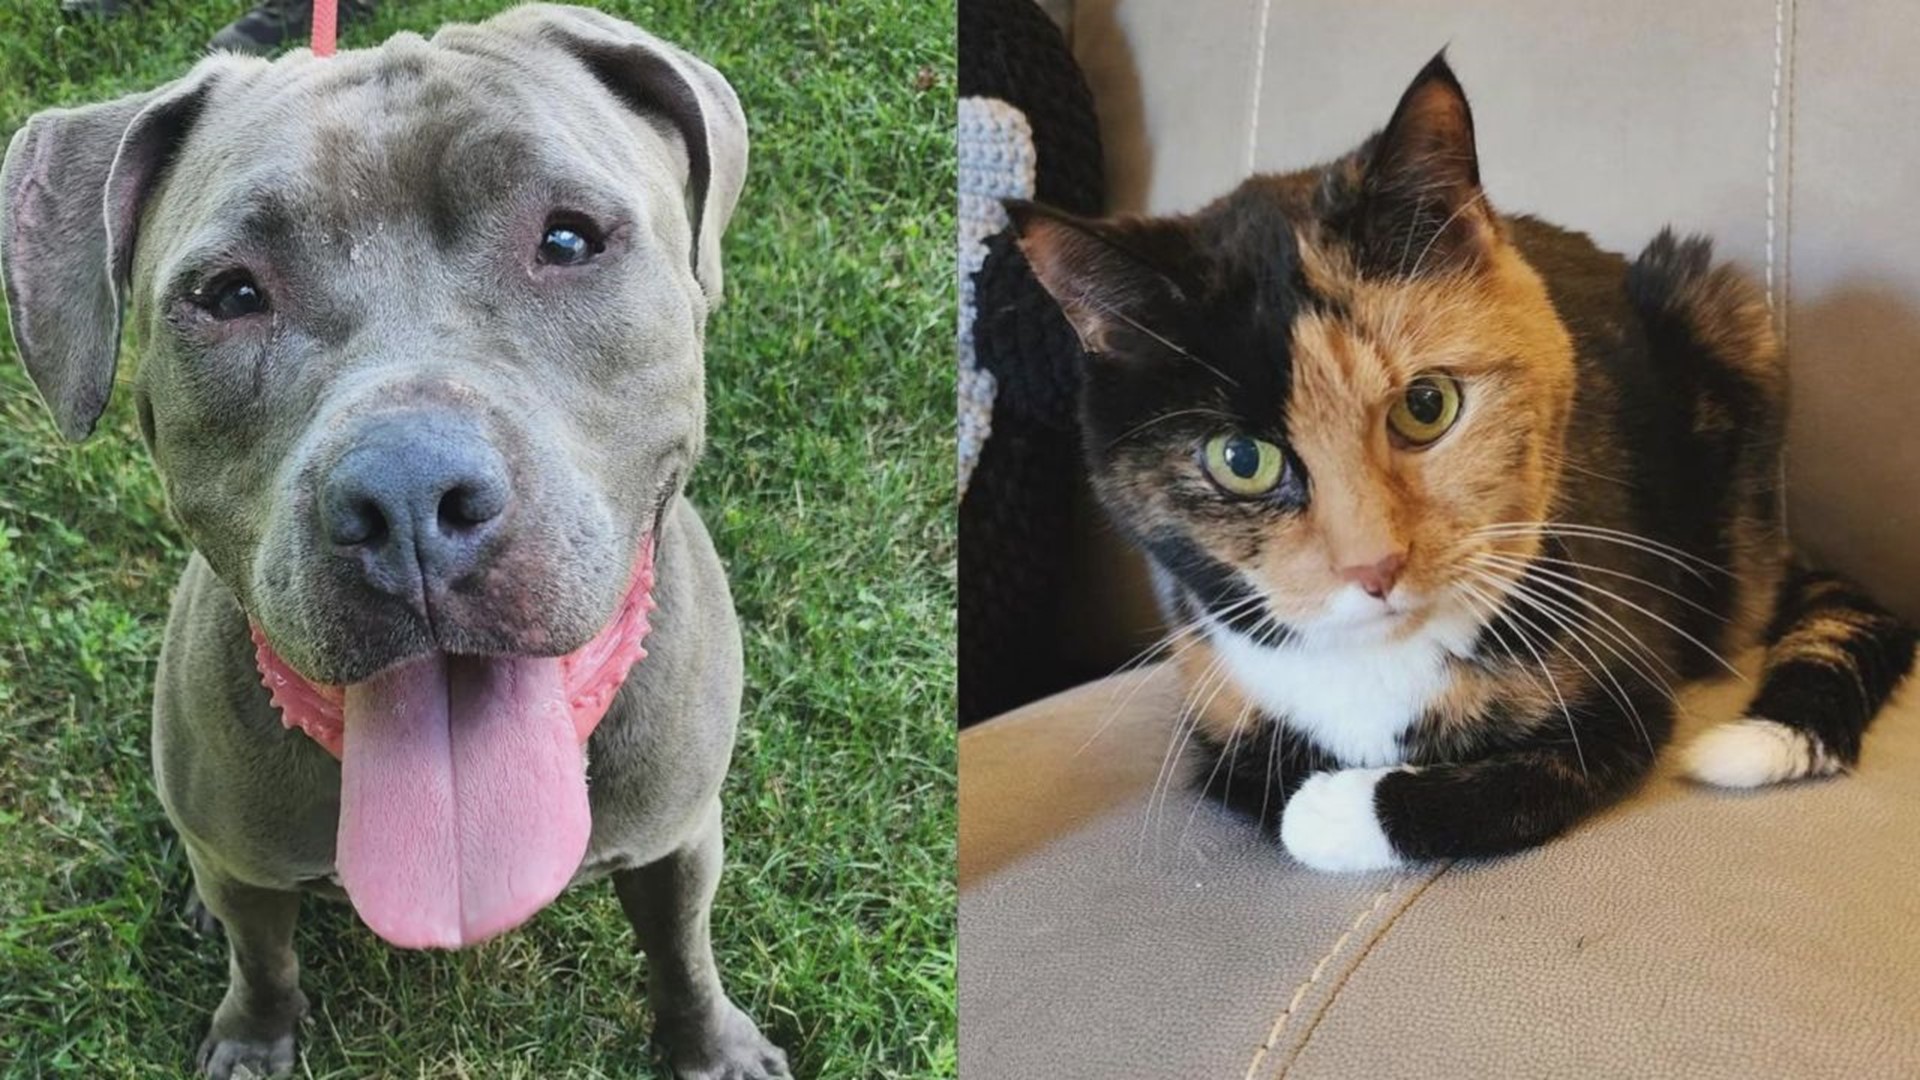 Both Smoke and Luru are senior residents at the York County SPCA who are looking for their forever family to spend their golden years with.